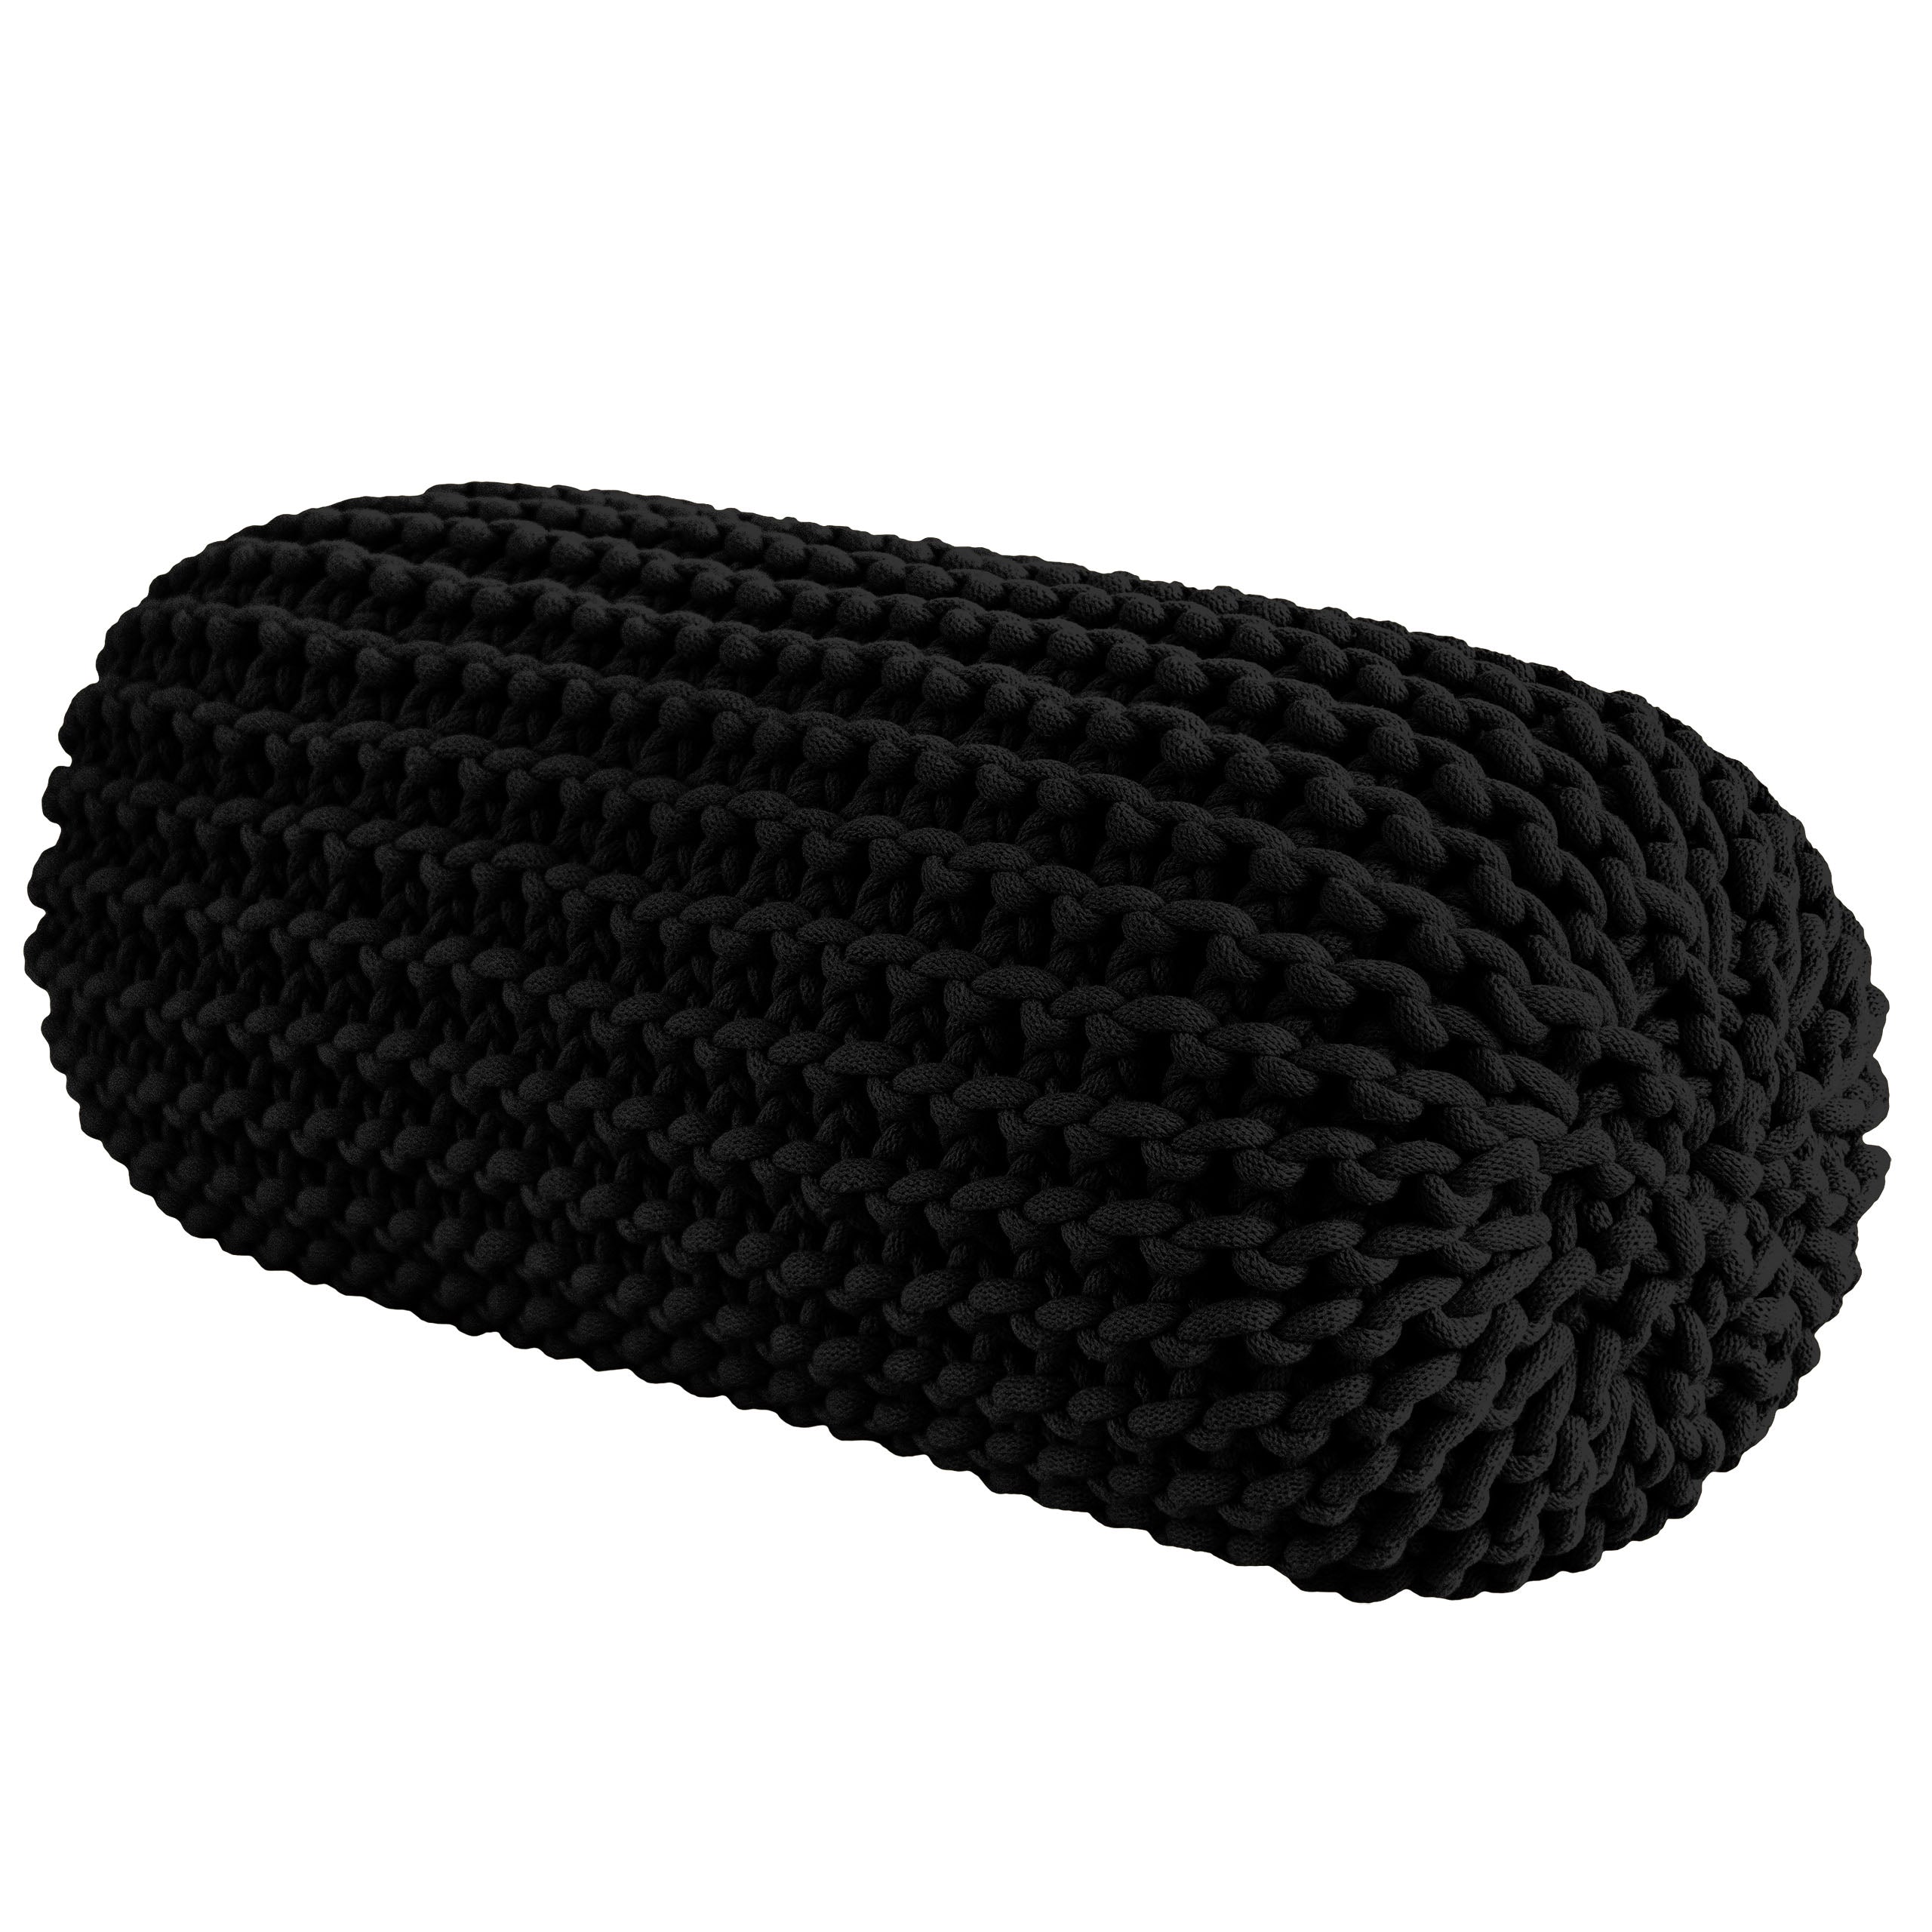 Zuri House Chunky Knitted Bolster Footrest | CHARCOAL - 70 x 30 cm (28 x 12 in)